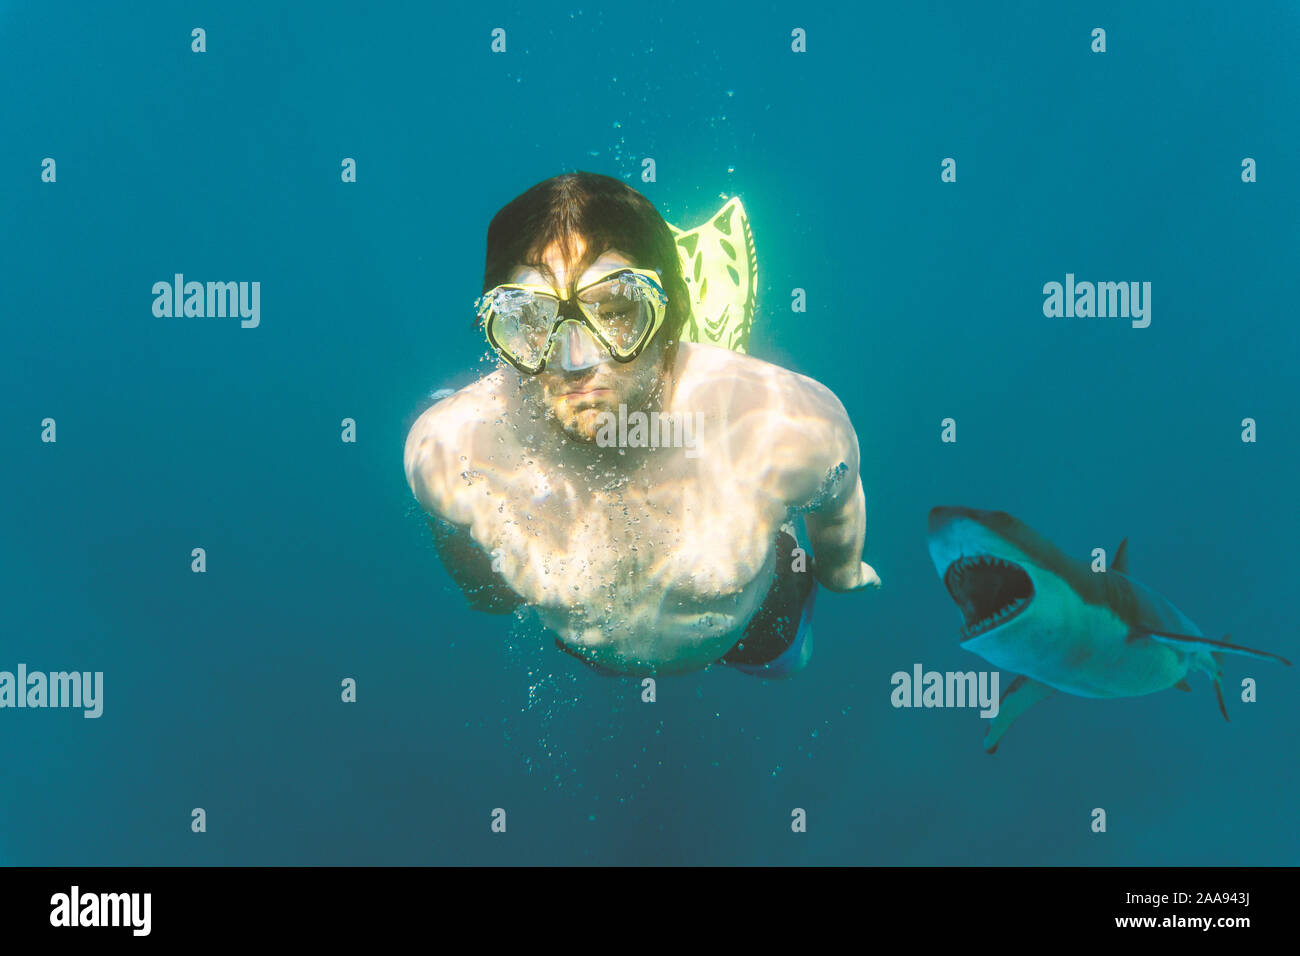 Man is attacked by a shark under water.  Diving sports, risk and danger and panic attack victim concept. Stock Photo